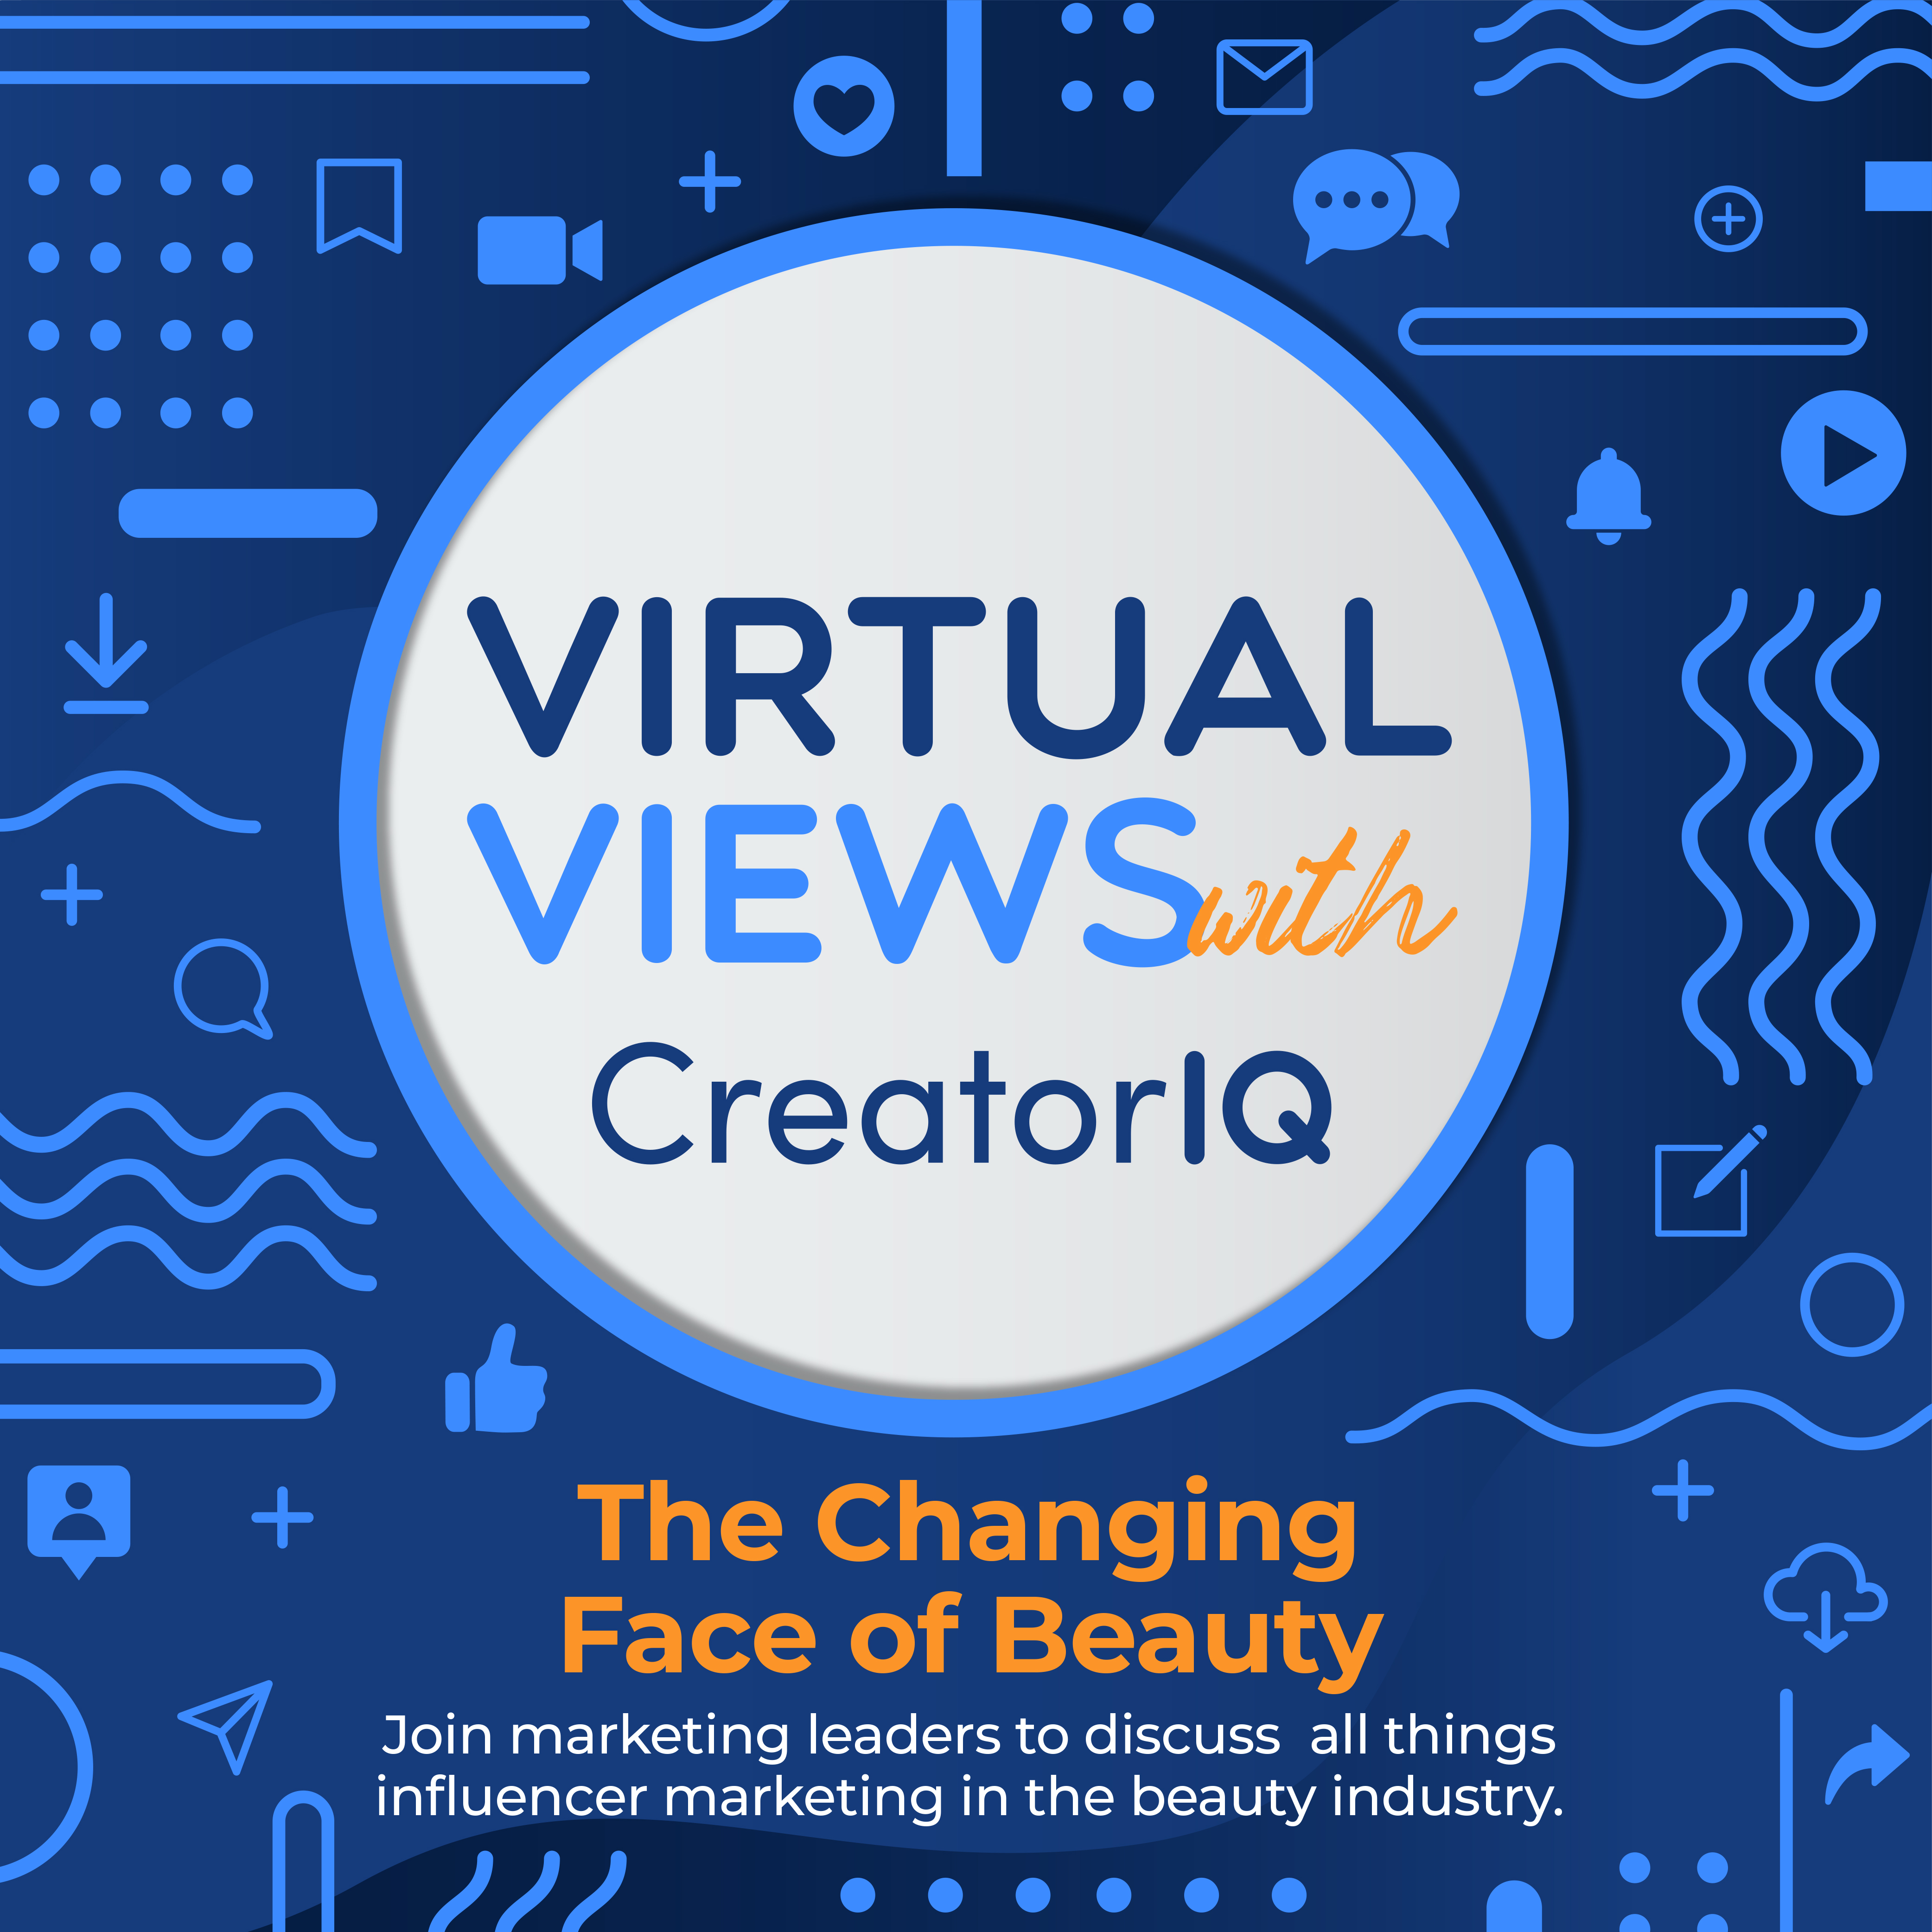 Virtual Views with CreatorIQ: The Changing Face of Beauty